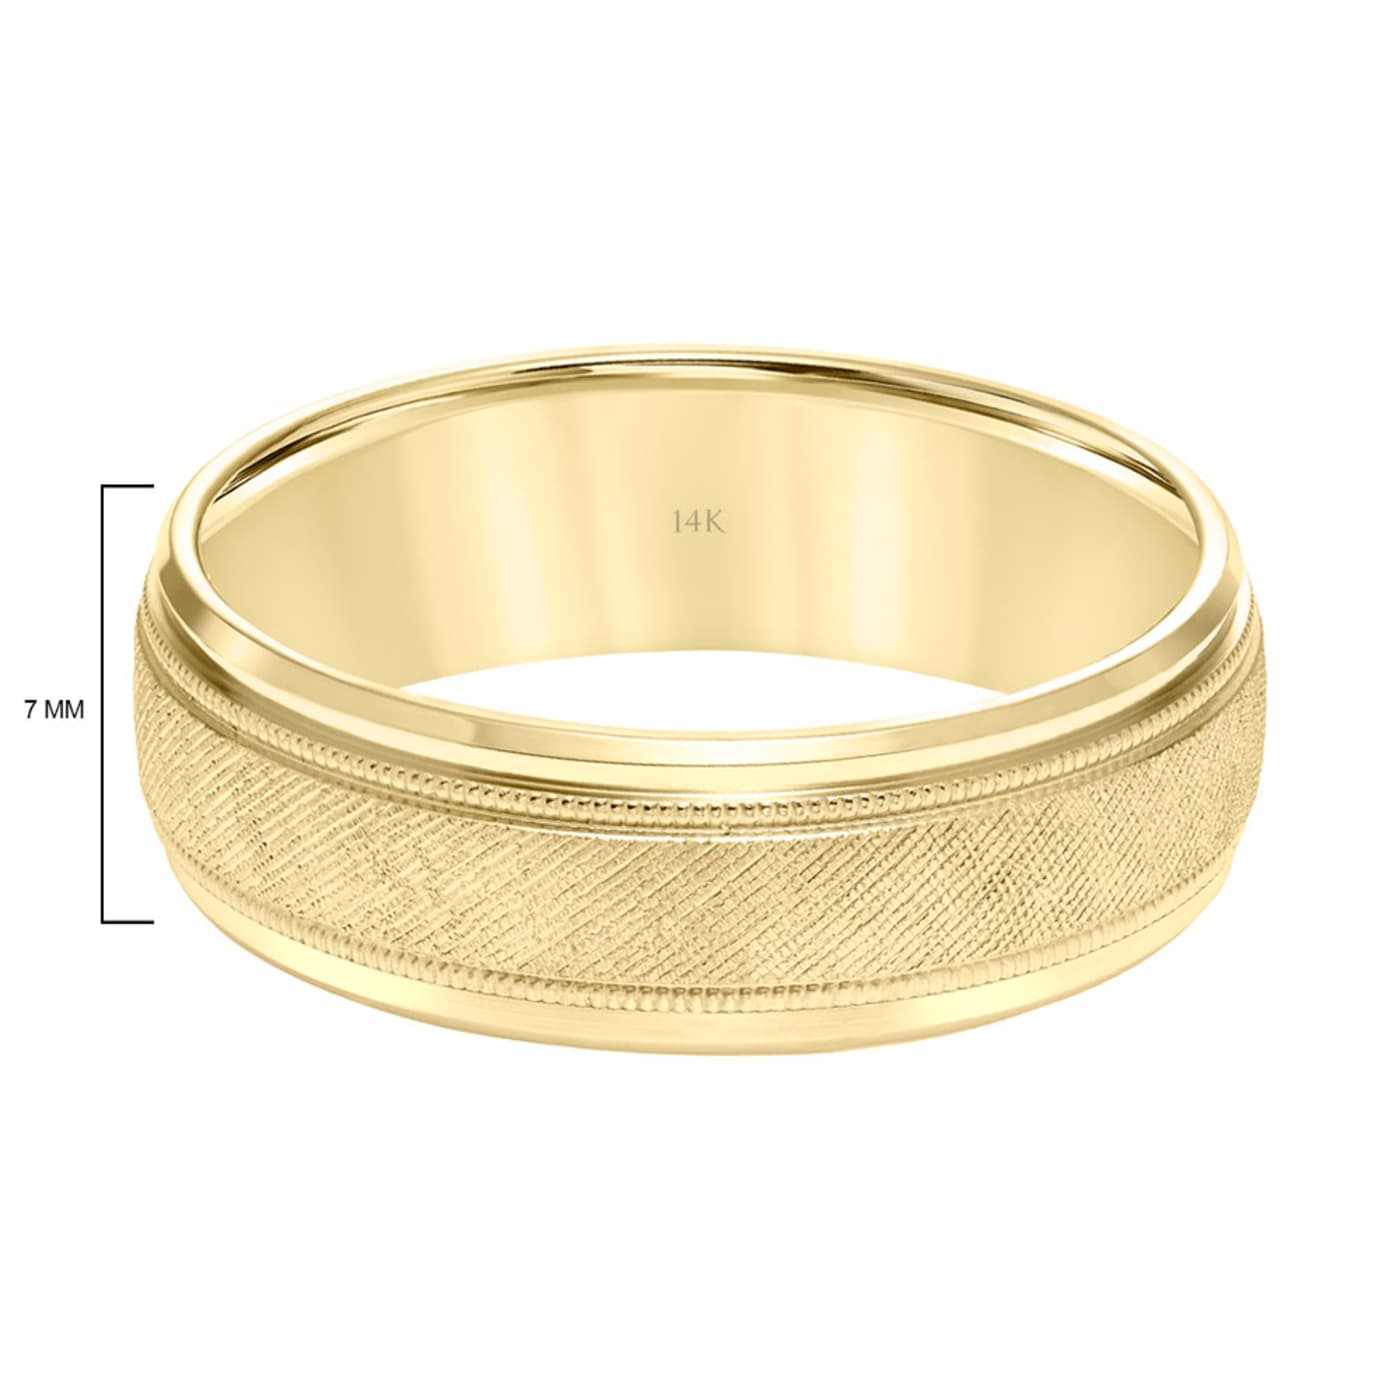 14K Yellow Gold 7MM 1STGPA Accents Band Wedding - by Brilliant Milgrain Florentine Finish with Expressions